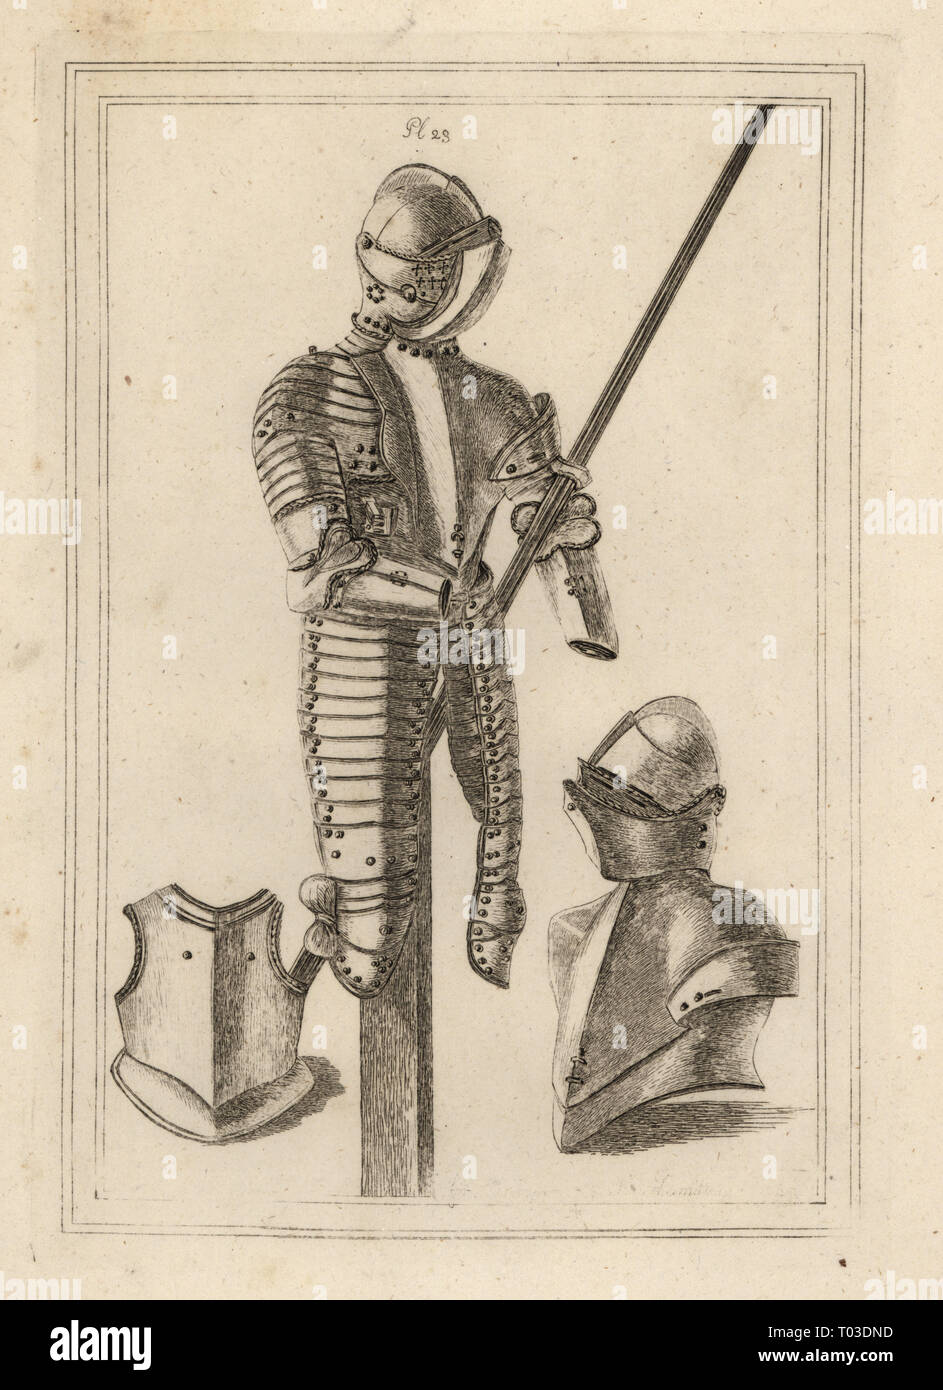 Suit of tilting armour with grand guard and lance rest from the Tower of London 1, helmet and grand guard 2, breastpiece of a cuirass 3. Copperplate engraving by J. Hamilton from Francis Grose's Military Antiquities respecting a History of the English Army, Stockdale, London, 1812. Stock Photo